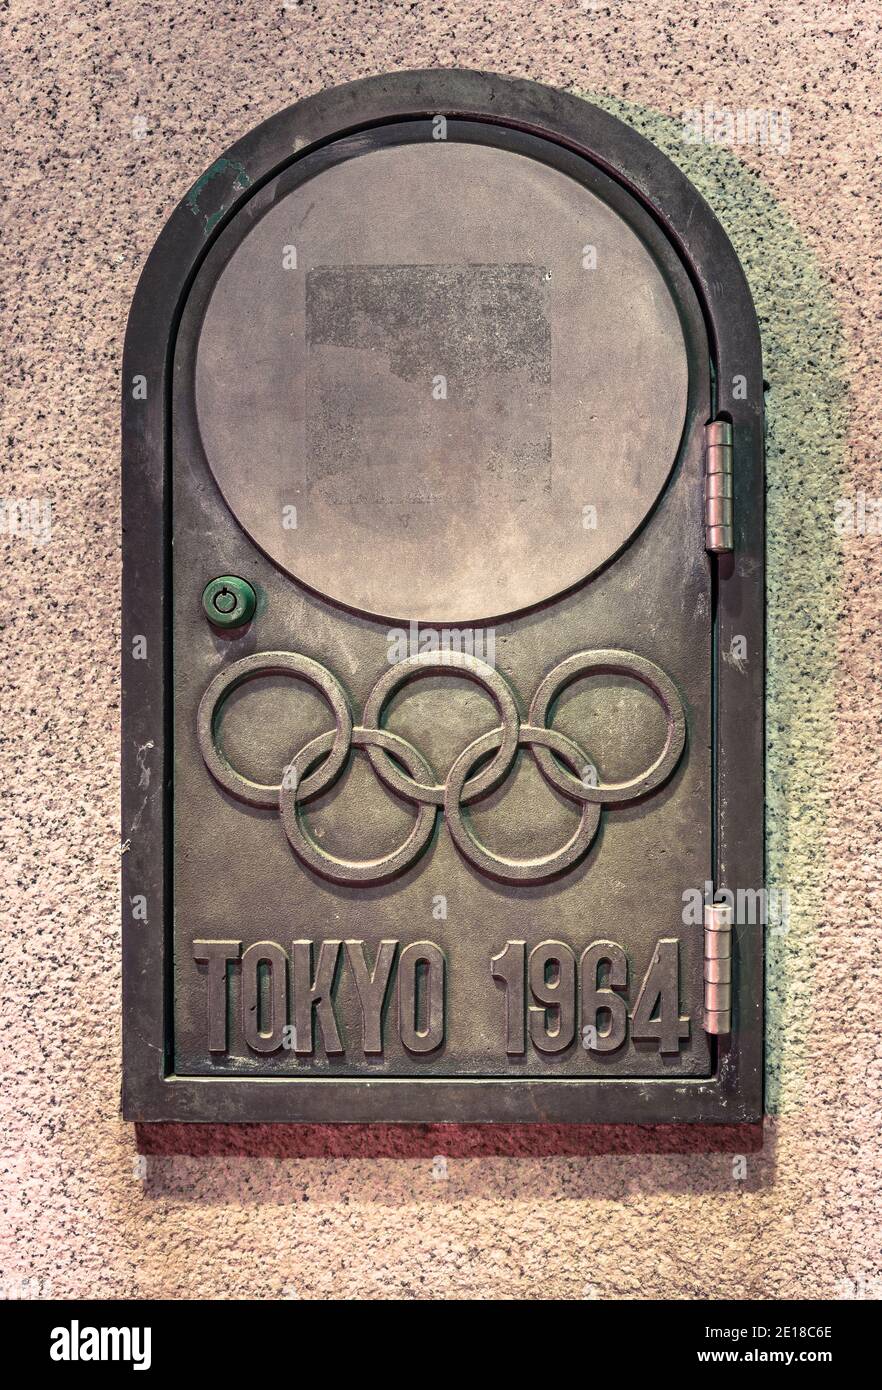 tokyo, japan - november 02 2020: Close-up of the cast iron gate housing the switch of the Olympic bridge named Gorinbashi created for 1964 Summer Olym Stock Photo